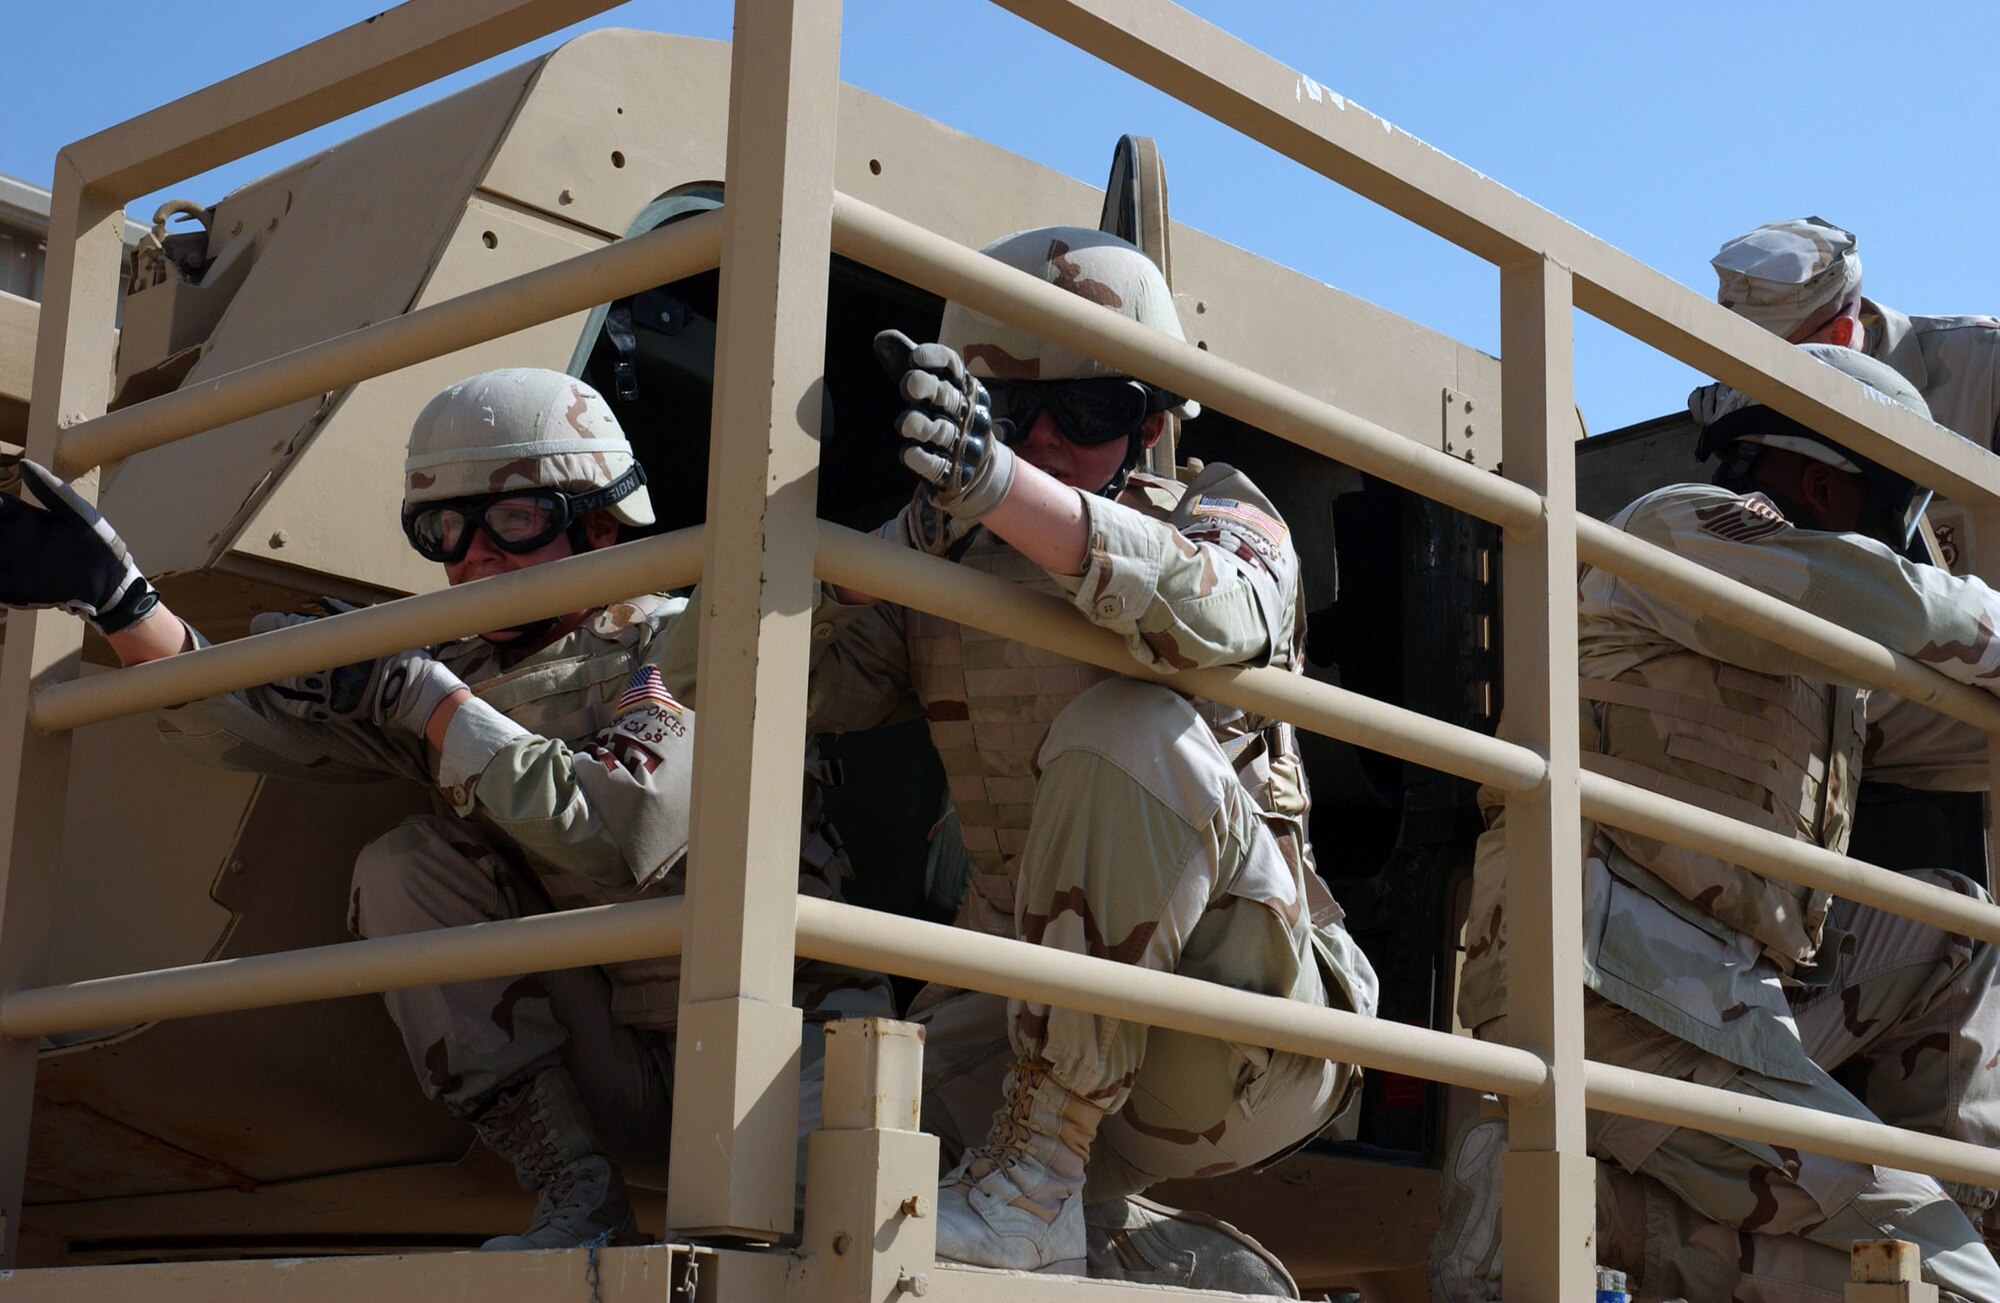 Airmen from the 379th Expeditionary Security Forces safely egress an inverted "Humvee" and take up positions to secure the perimeter against the enemy during specialized training at an Army camp in Southwest Asia.  The training, using a rollover Humvee simulator, teaches Airmen how to escape an inverted Humvee and increase their chance of survival after a catastrophic event.  (U.S. Air Force photo/Tech. Sgt. Sabrina Foster)